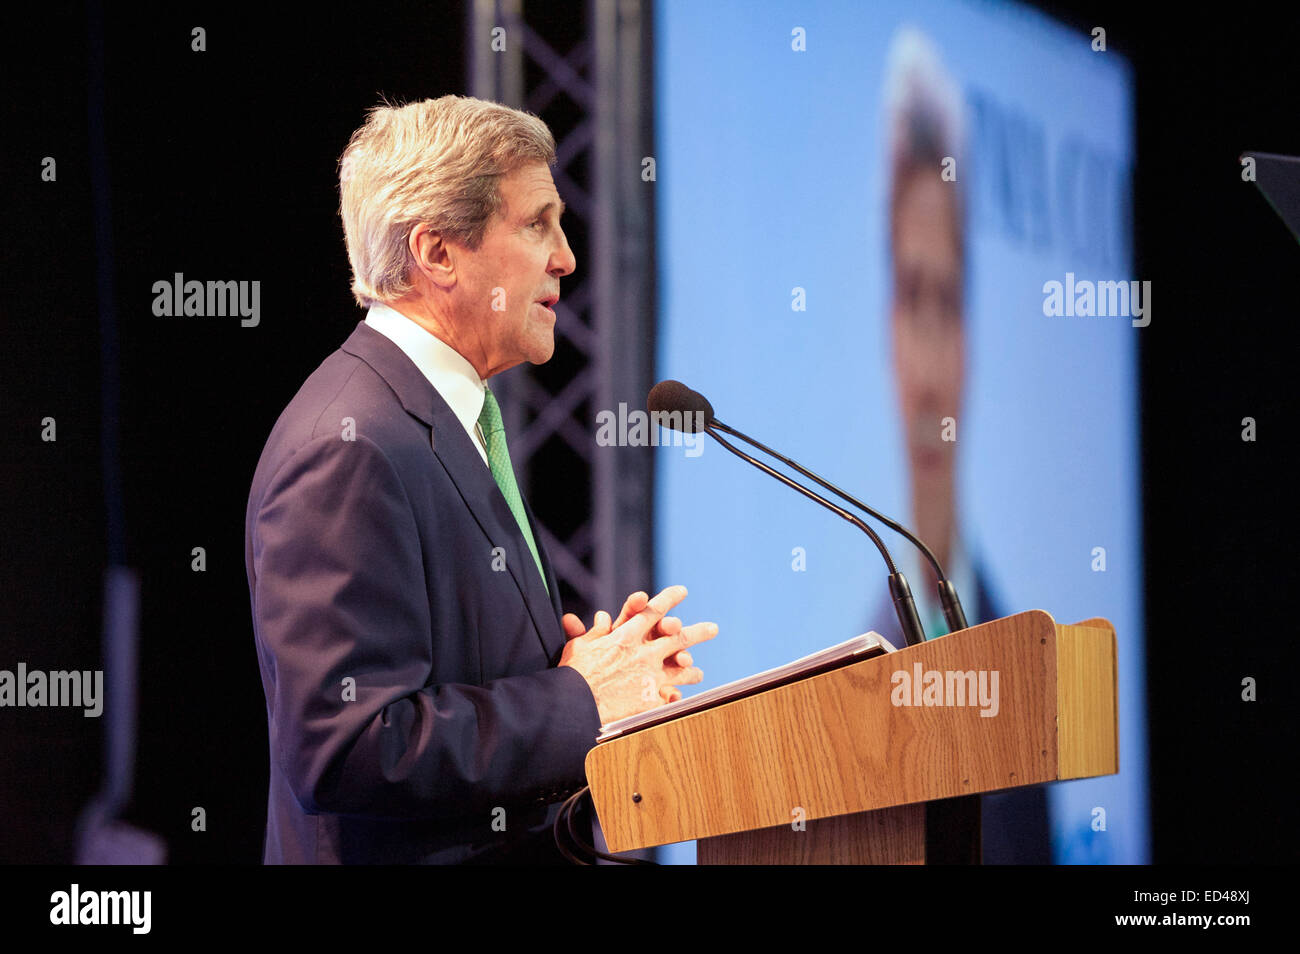 U.S. Secretary of State John Kerry addresses the 20th session of the Conference of the Parties to the United Nations Framework Convention on Climate Change in Lima, Peru, on December 11, 2014, before meeting with Peruvian President Ollanta Humala. Stock Photo